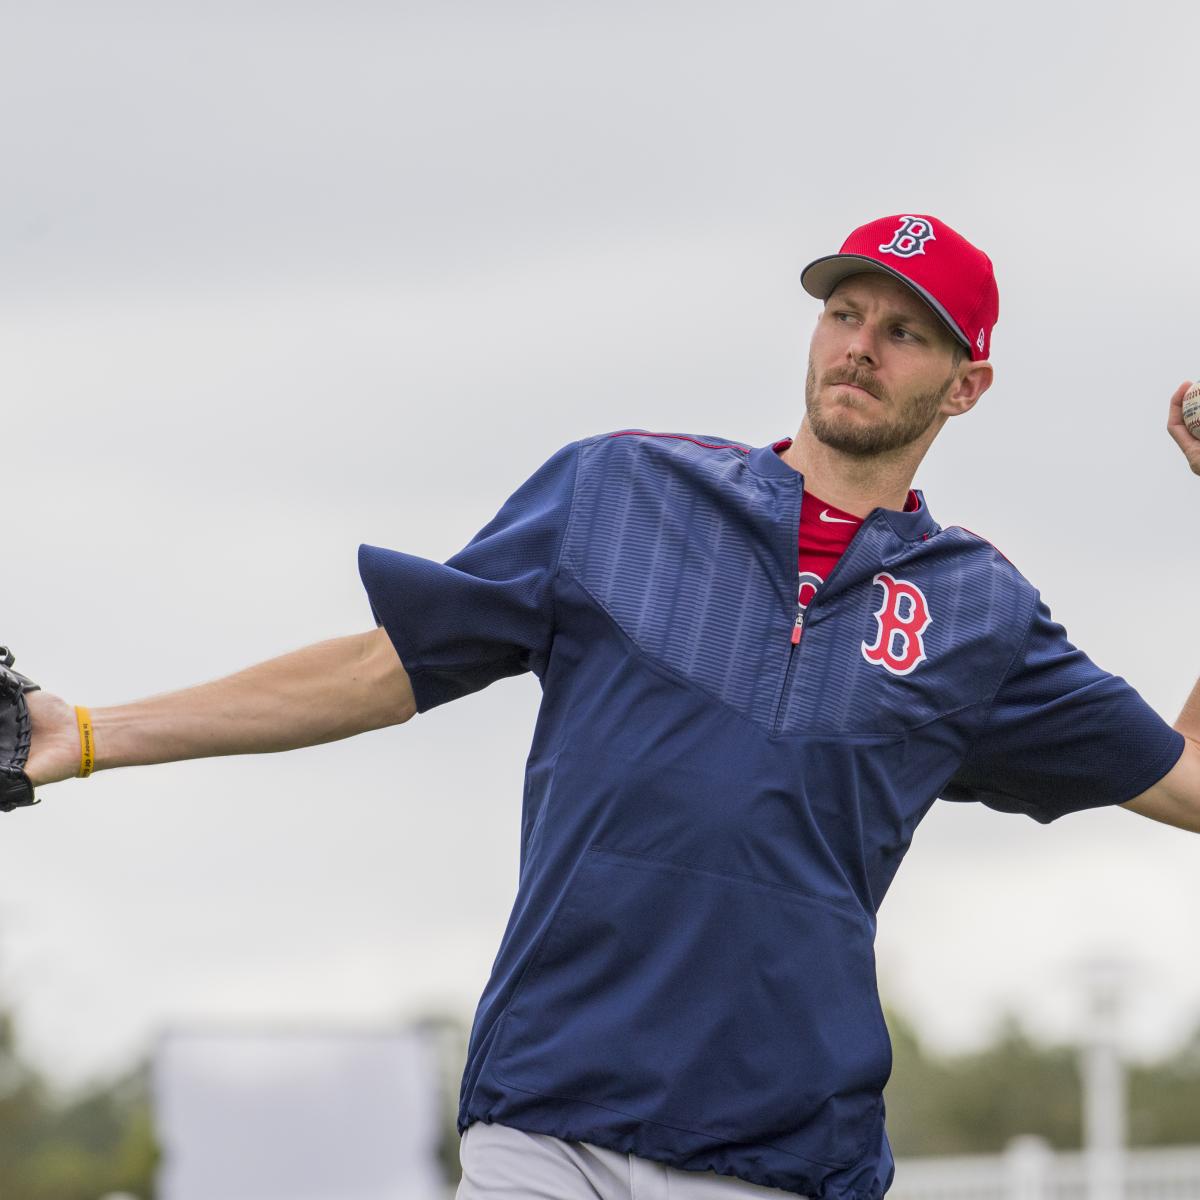 Chris Sale apologizes, but stands by decision to cut up jerseys